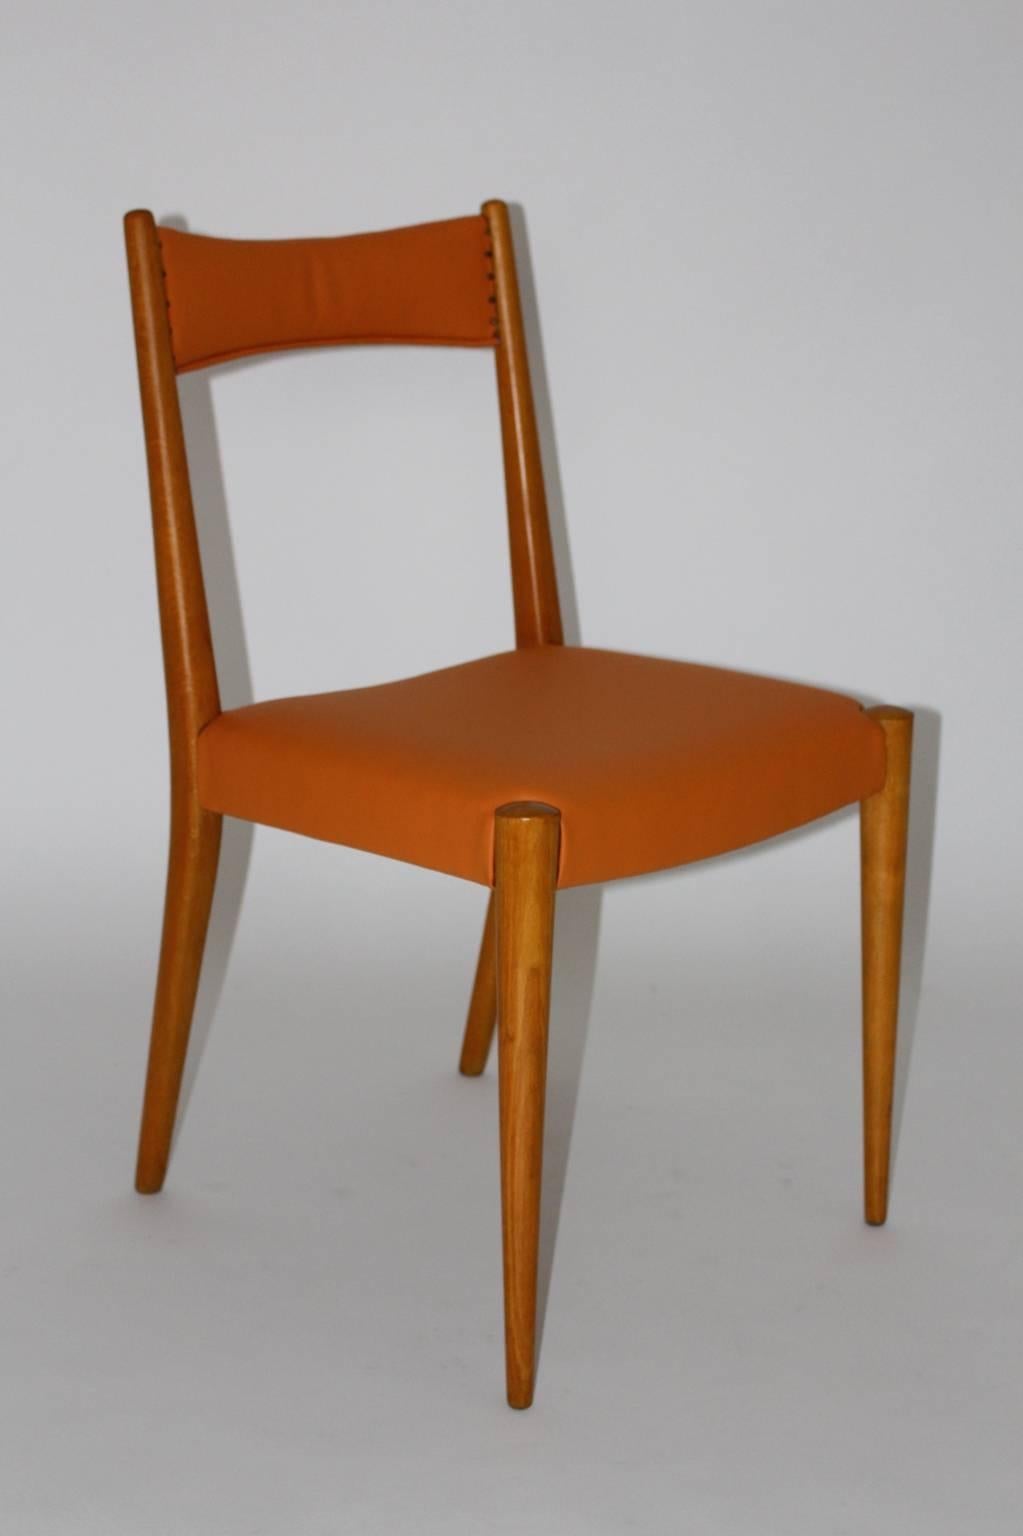 Mid century modern vintage beech orange ten ( 10 ) dining chairs or chairs  designed by Anna Lülja Praun, Vienna 1953 and executed by Wiesner - Hager. 
These ten dining chairs stand out through its minimalistic design features, which assimilated